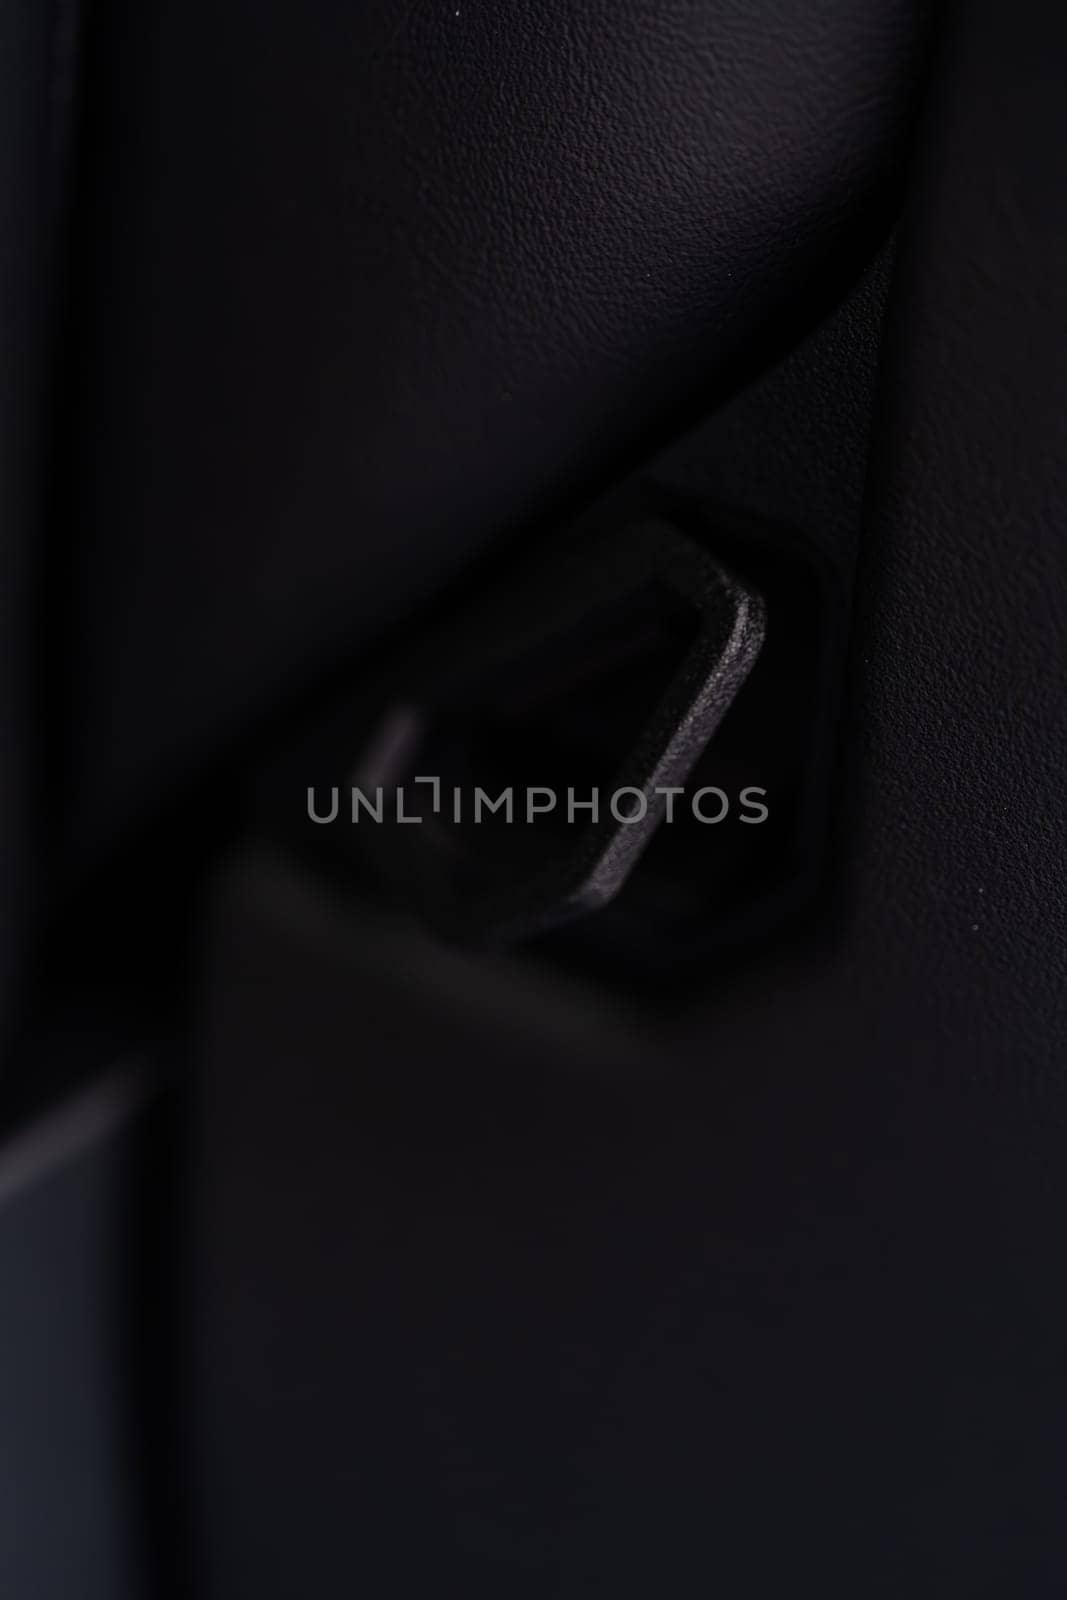 Denver, Colorado, USA-May 5, 2024-This image shows a detailed view of the back seat release pull strap in a Tesla Cybertruck, emphasizing the subtle yet functional design integrated within the vehicle interior.